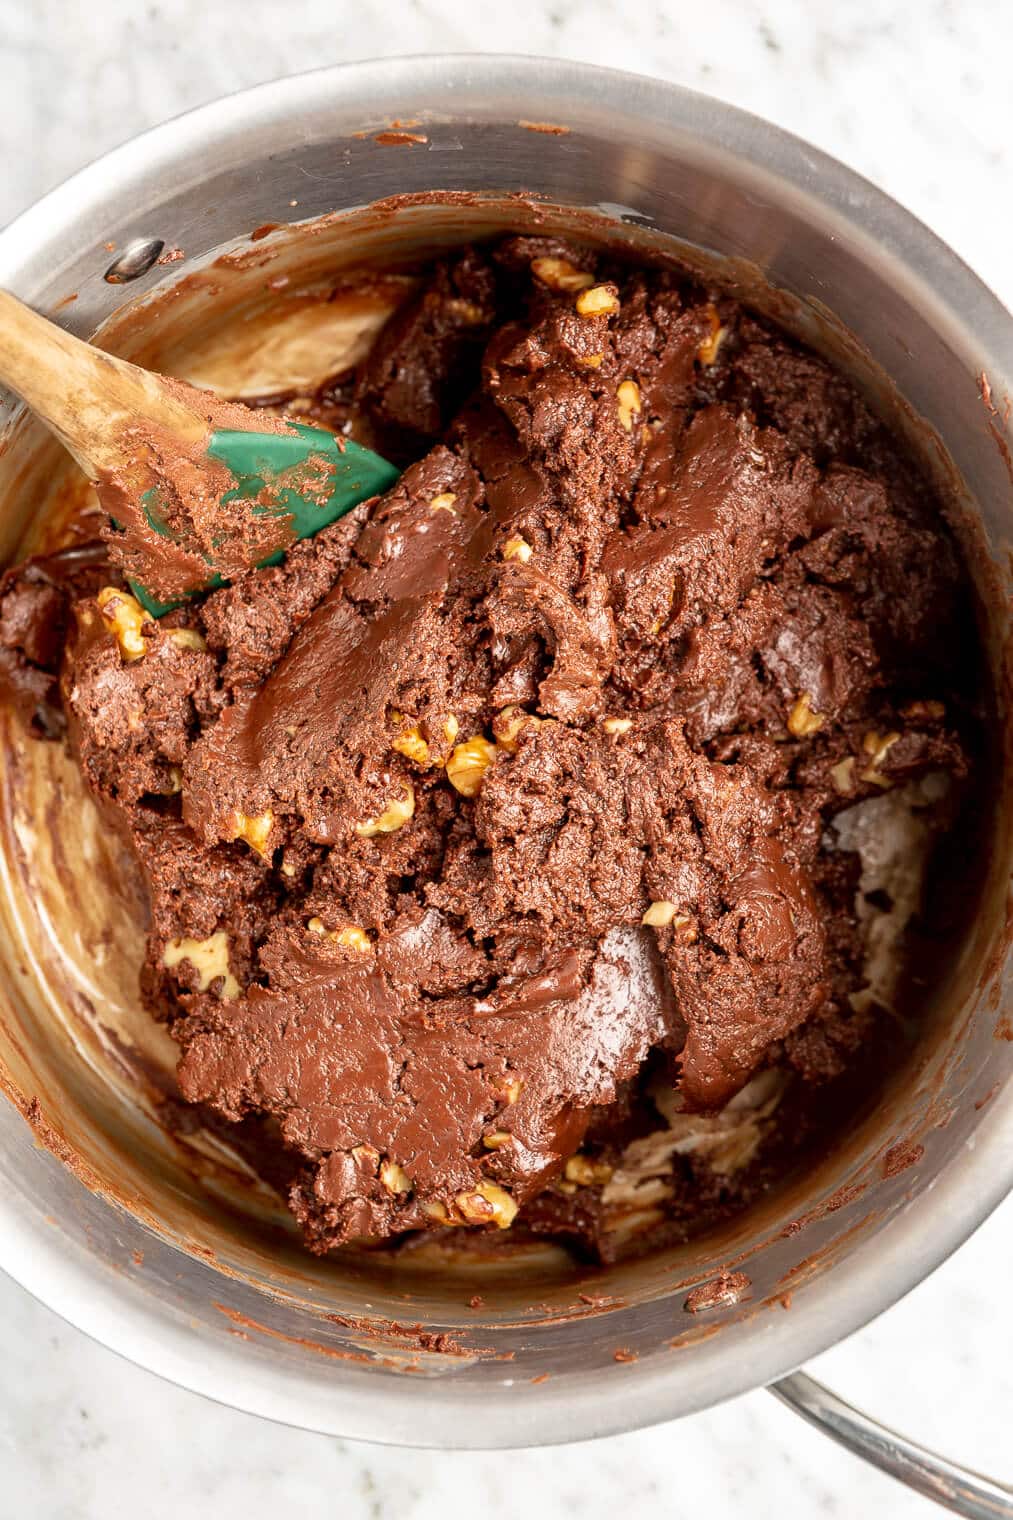 Spatula stirring melted chocolate, condensed milk, and walnuts in a stainless steel saucepan.